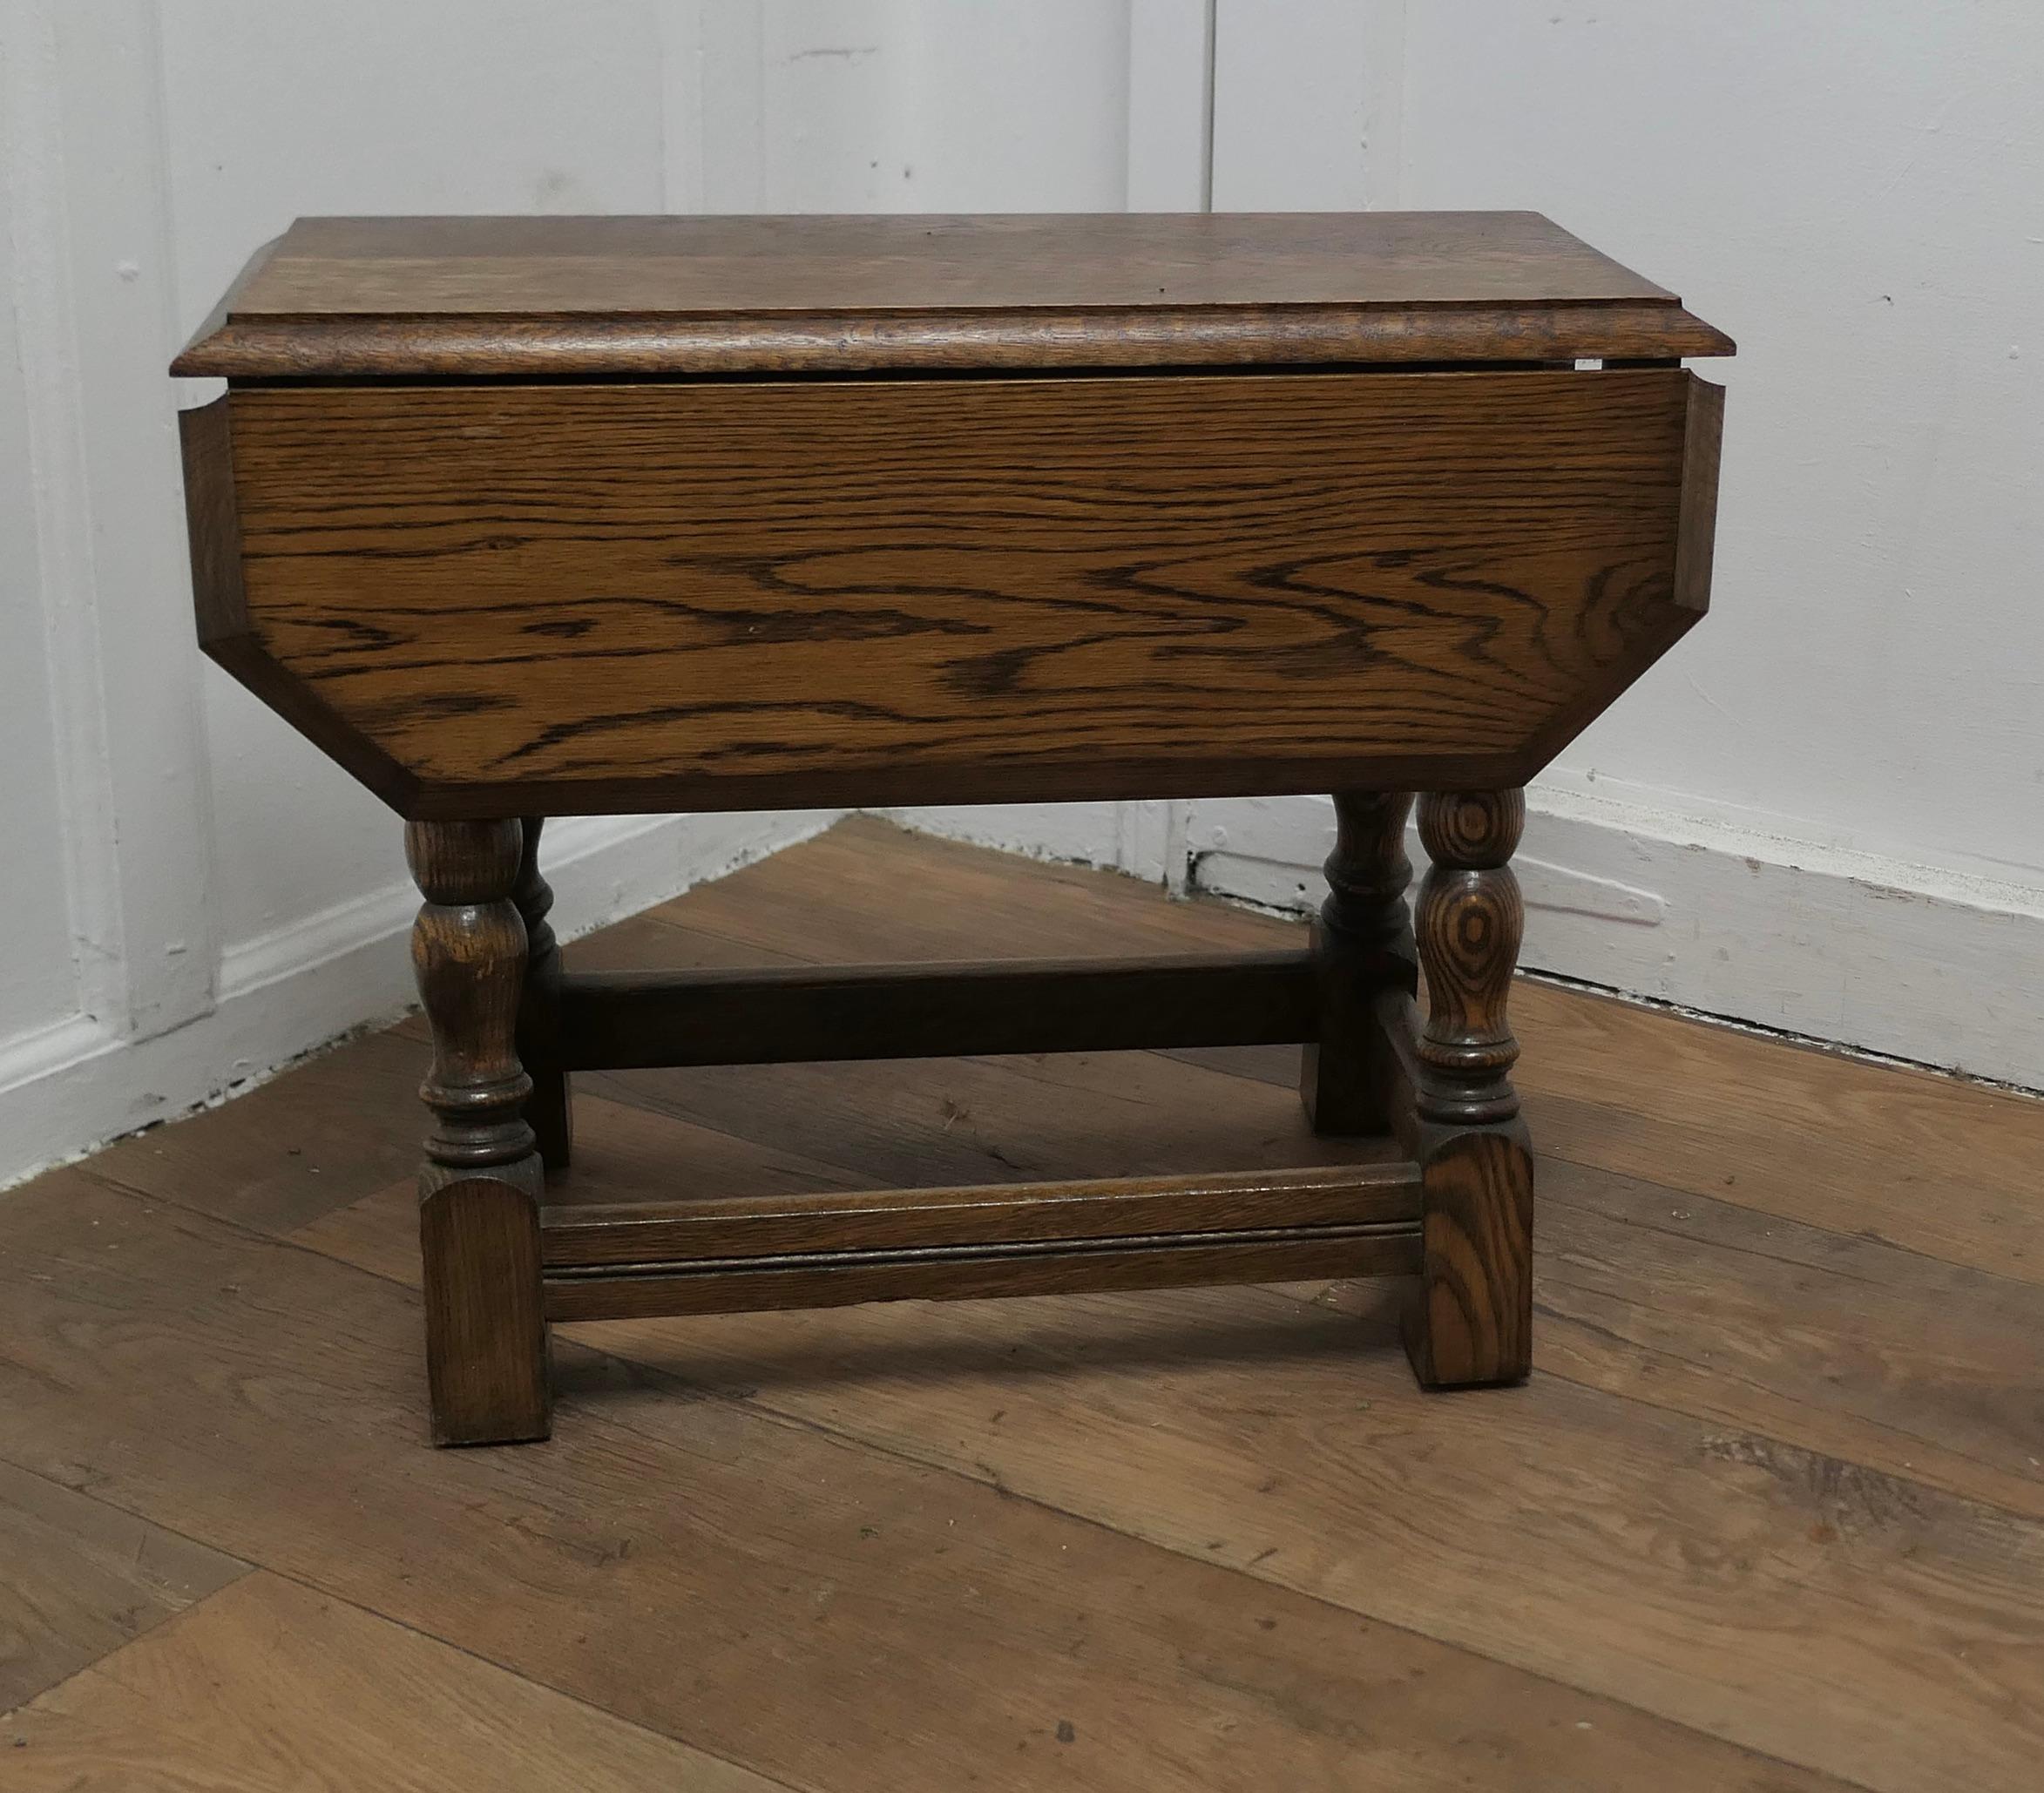 An Oak Joint Stool, Coffee Table

This a good Oak Joint or Joined Stool which has the added advantage of converting to an occasional table or coffee table when required
This is a good solid stool, with a good colour, just raise the oak flaps and